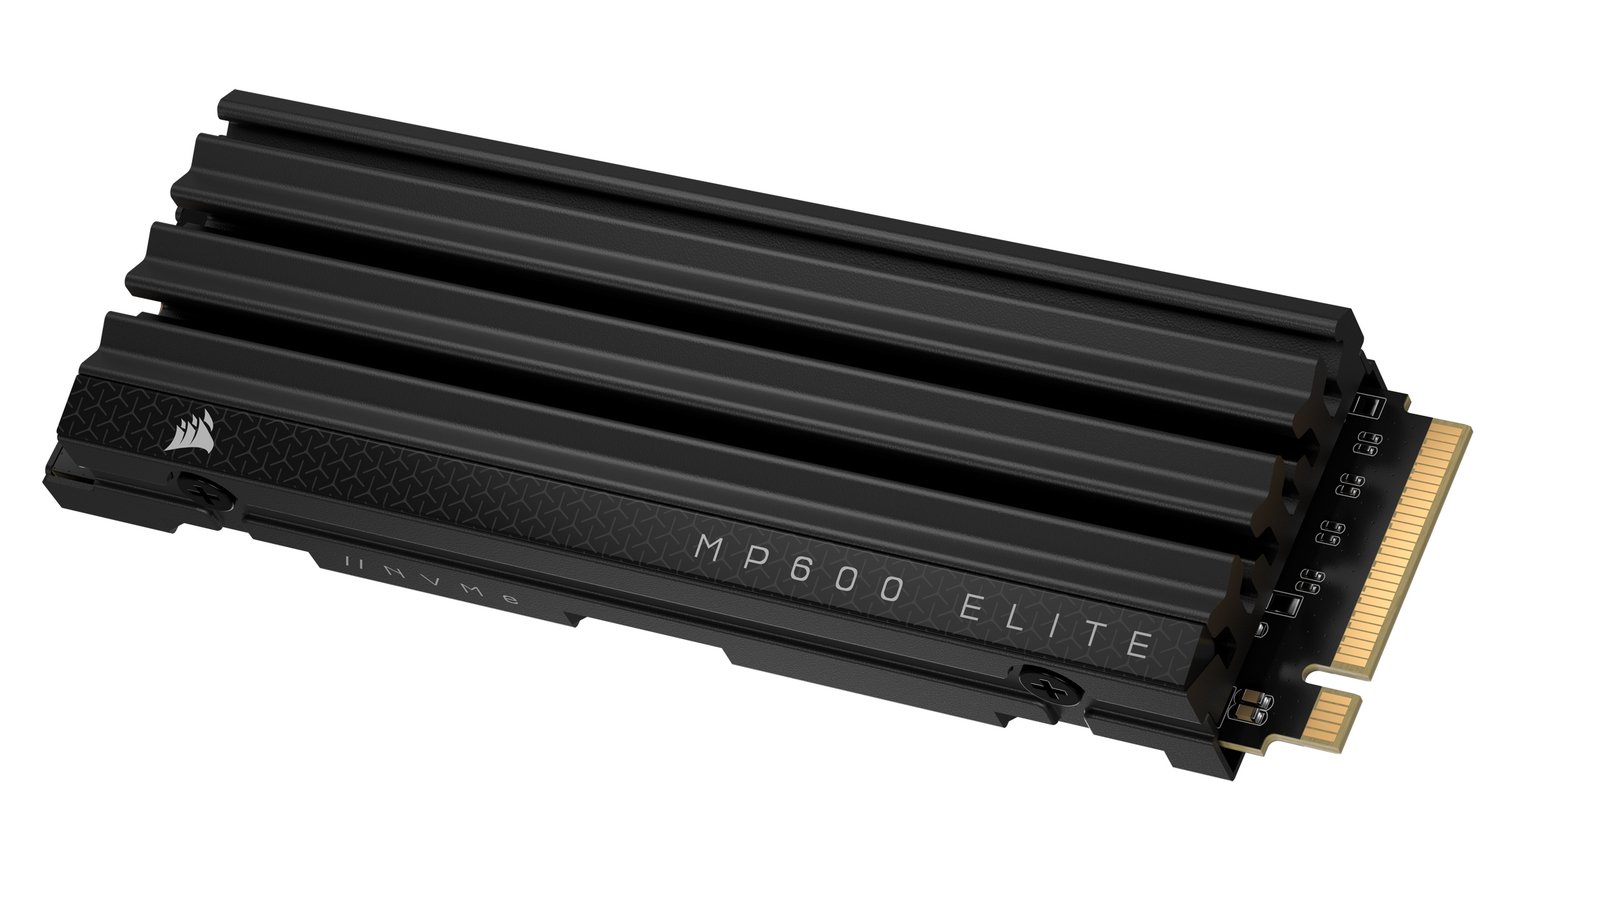 More information about "Corsair MP600 Elite with Heatsink 2TB SSD Review"